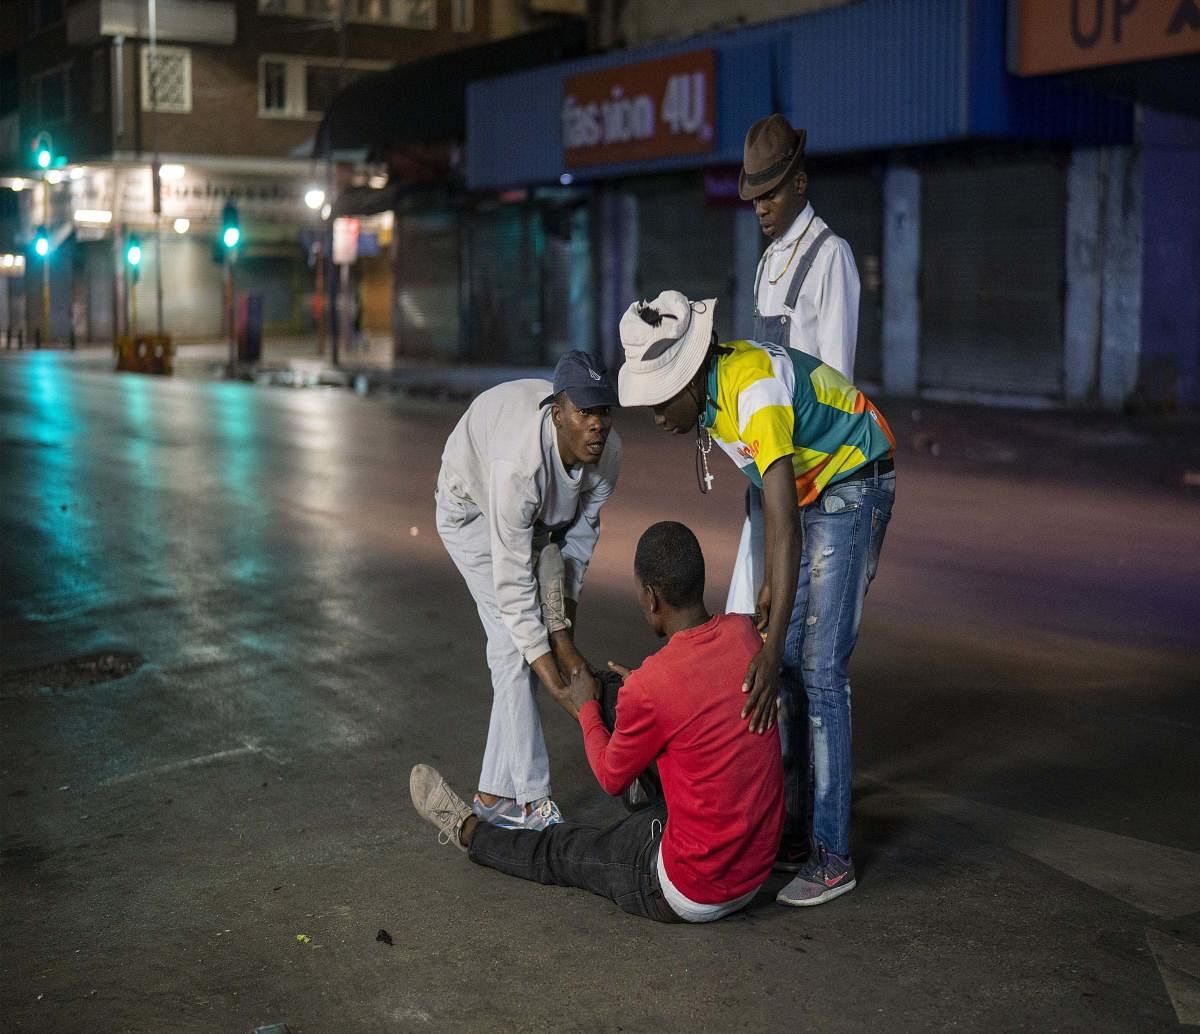 People assist a man who fell down after being chased by police for violating the lockdown in downtown Johannesburg, South Africa (AP Photo)